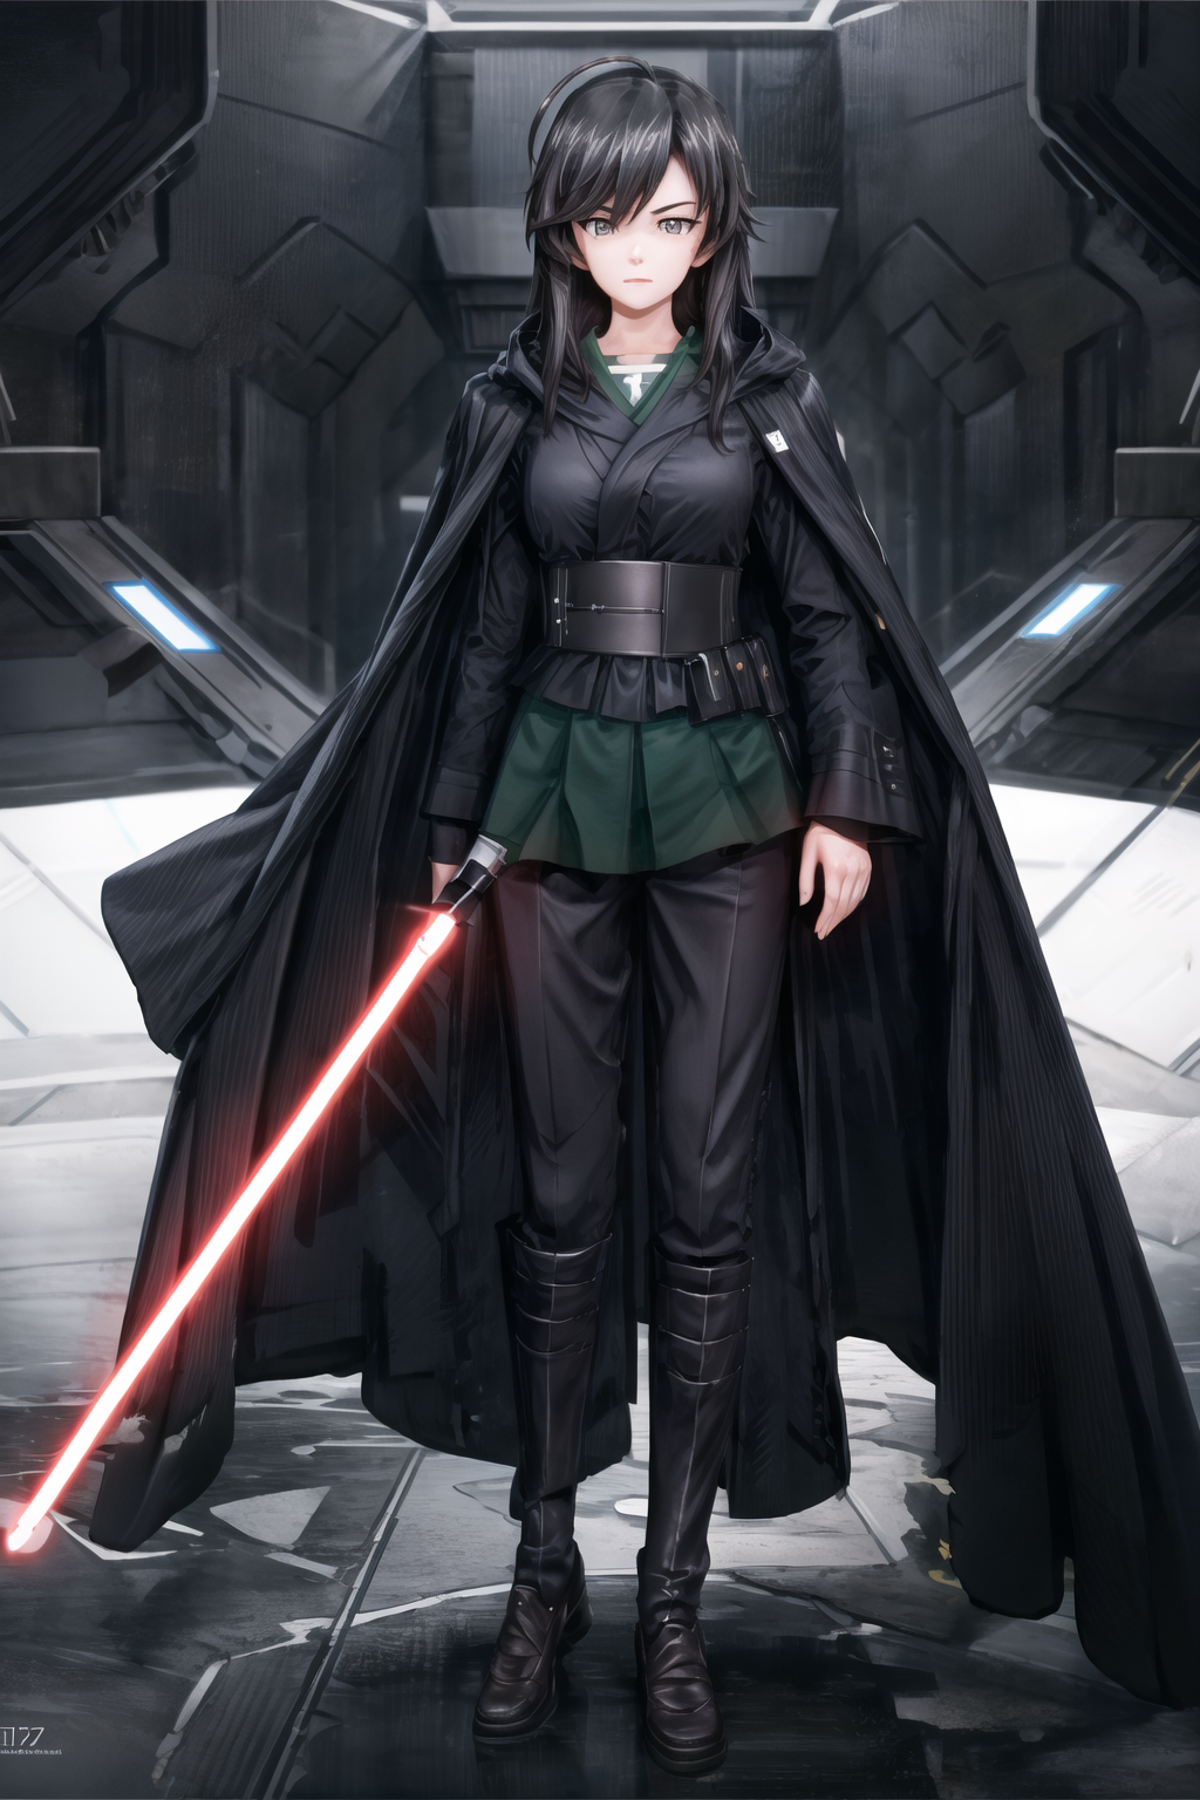 Star Wars sith outfit image by anonymoose1234